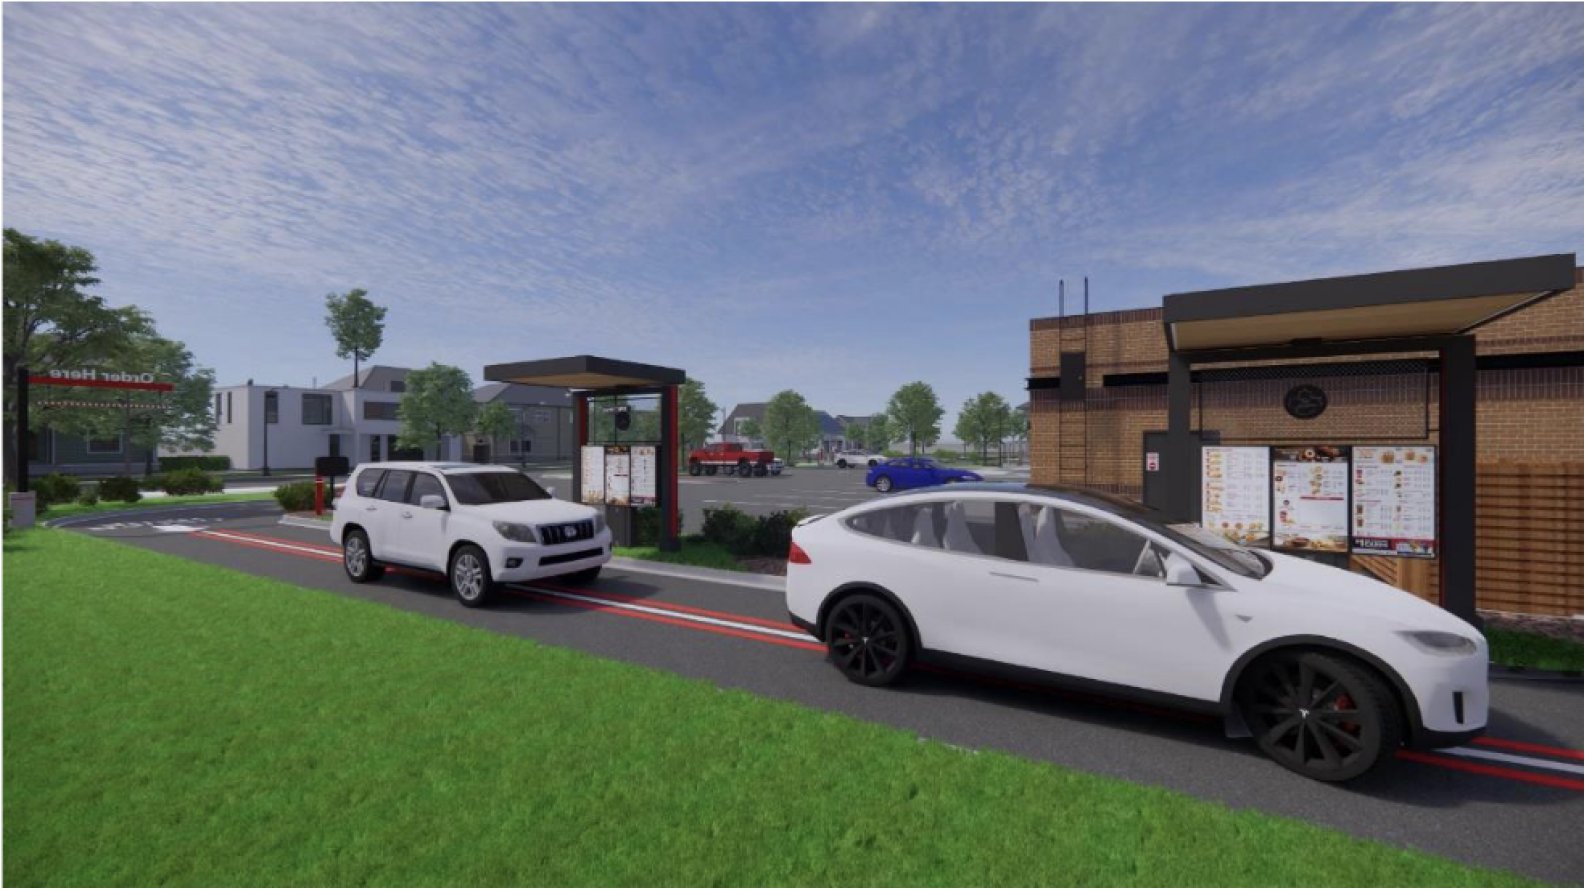 The Future of Fast Food Could Be Entirely Drive-Through